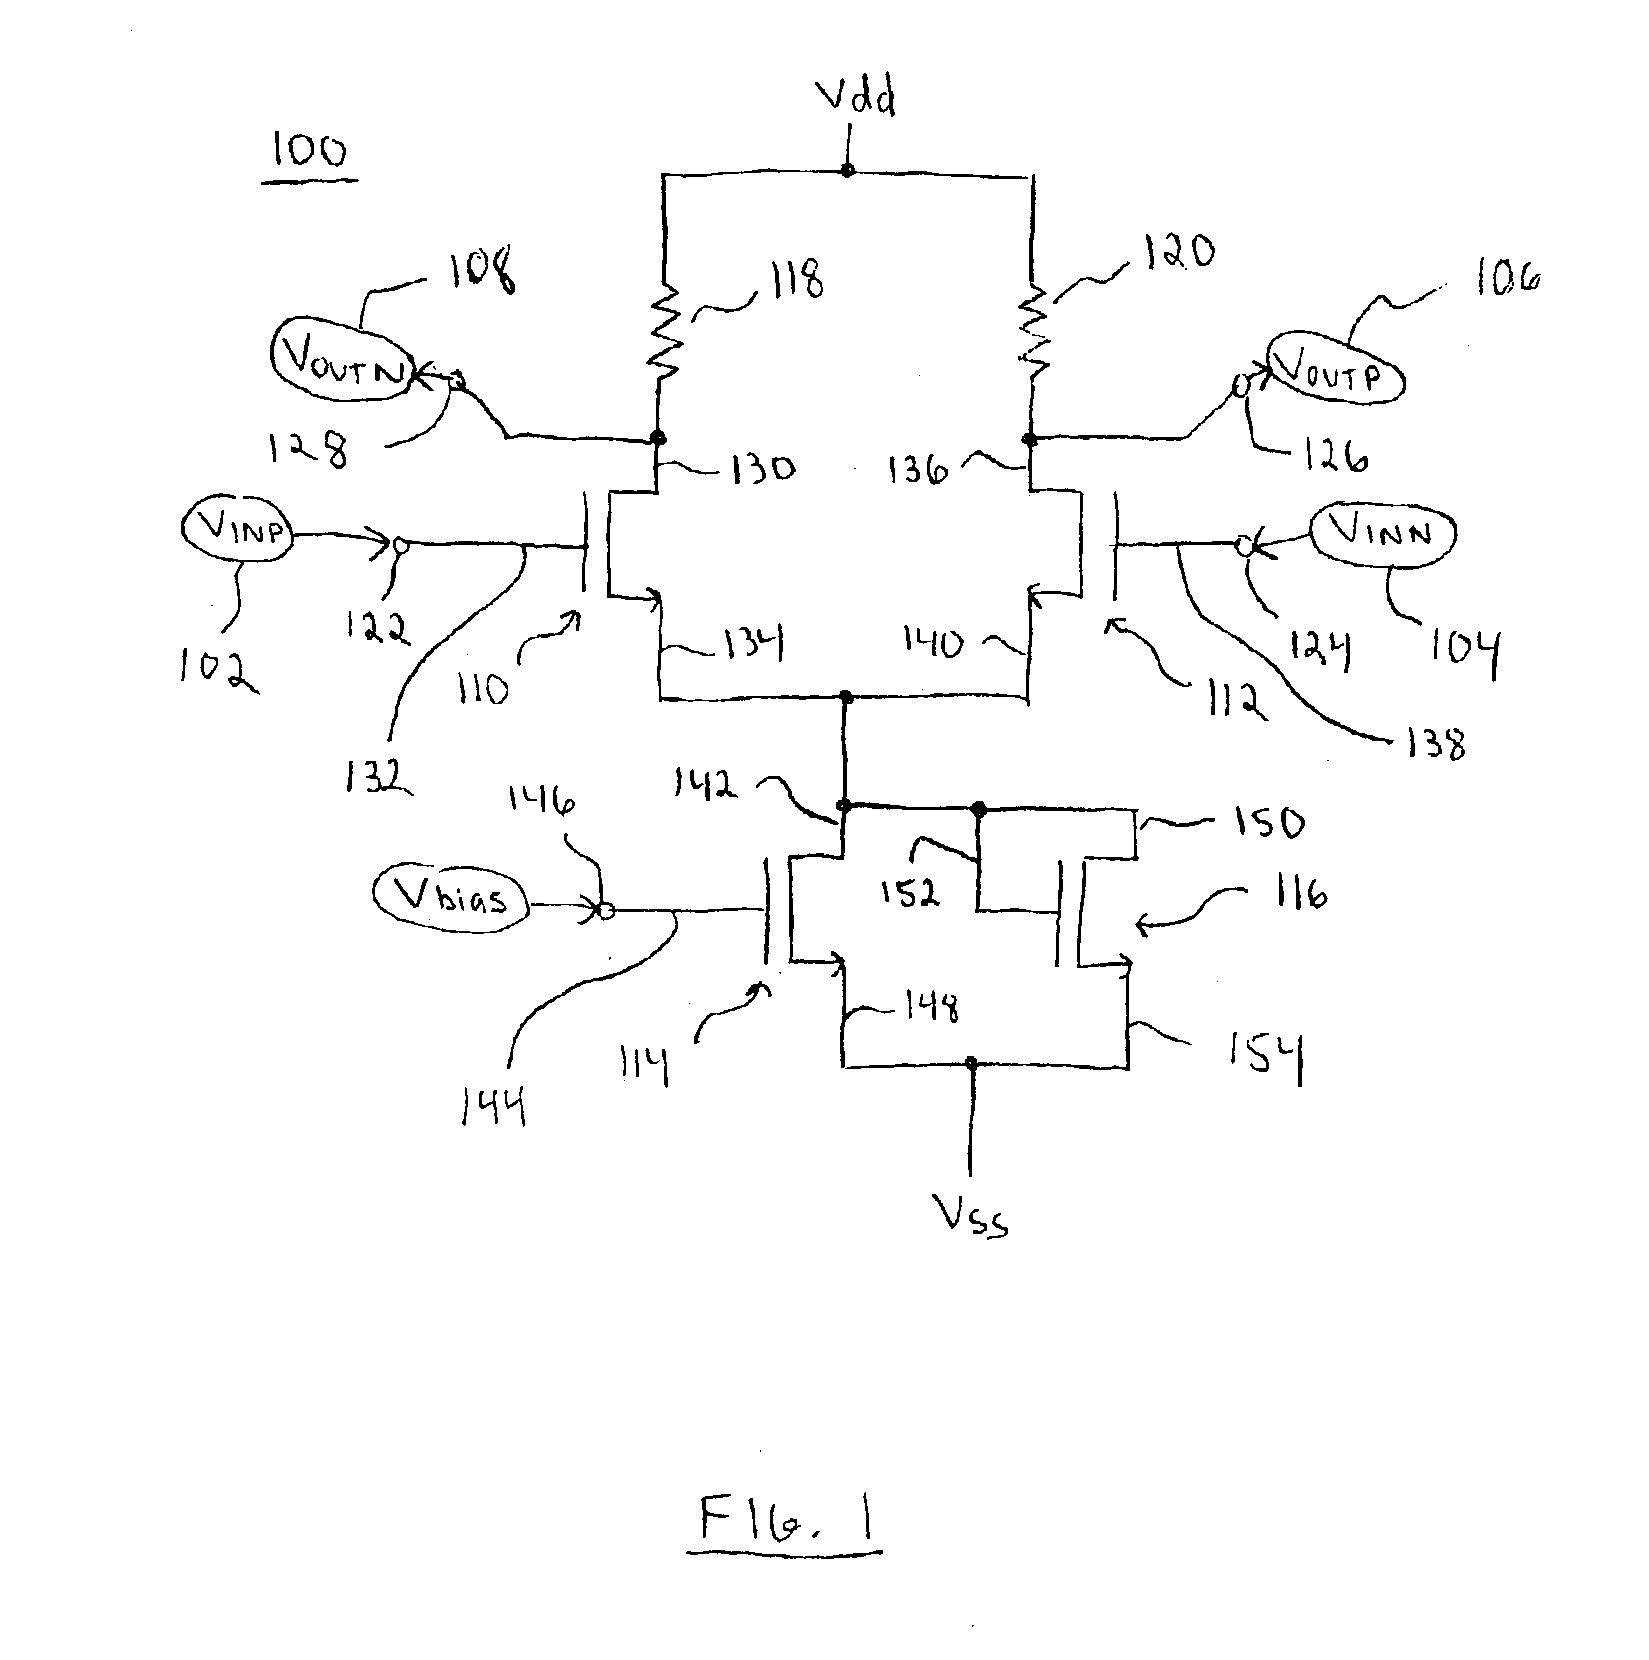 Circuit with voltage clamping for bias transistor to allow power supply over-voltage